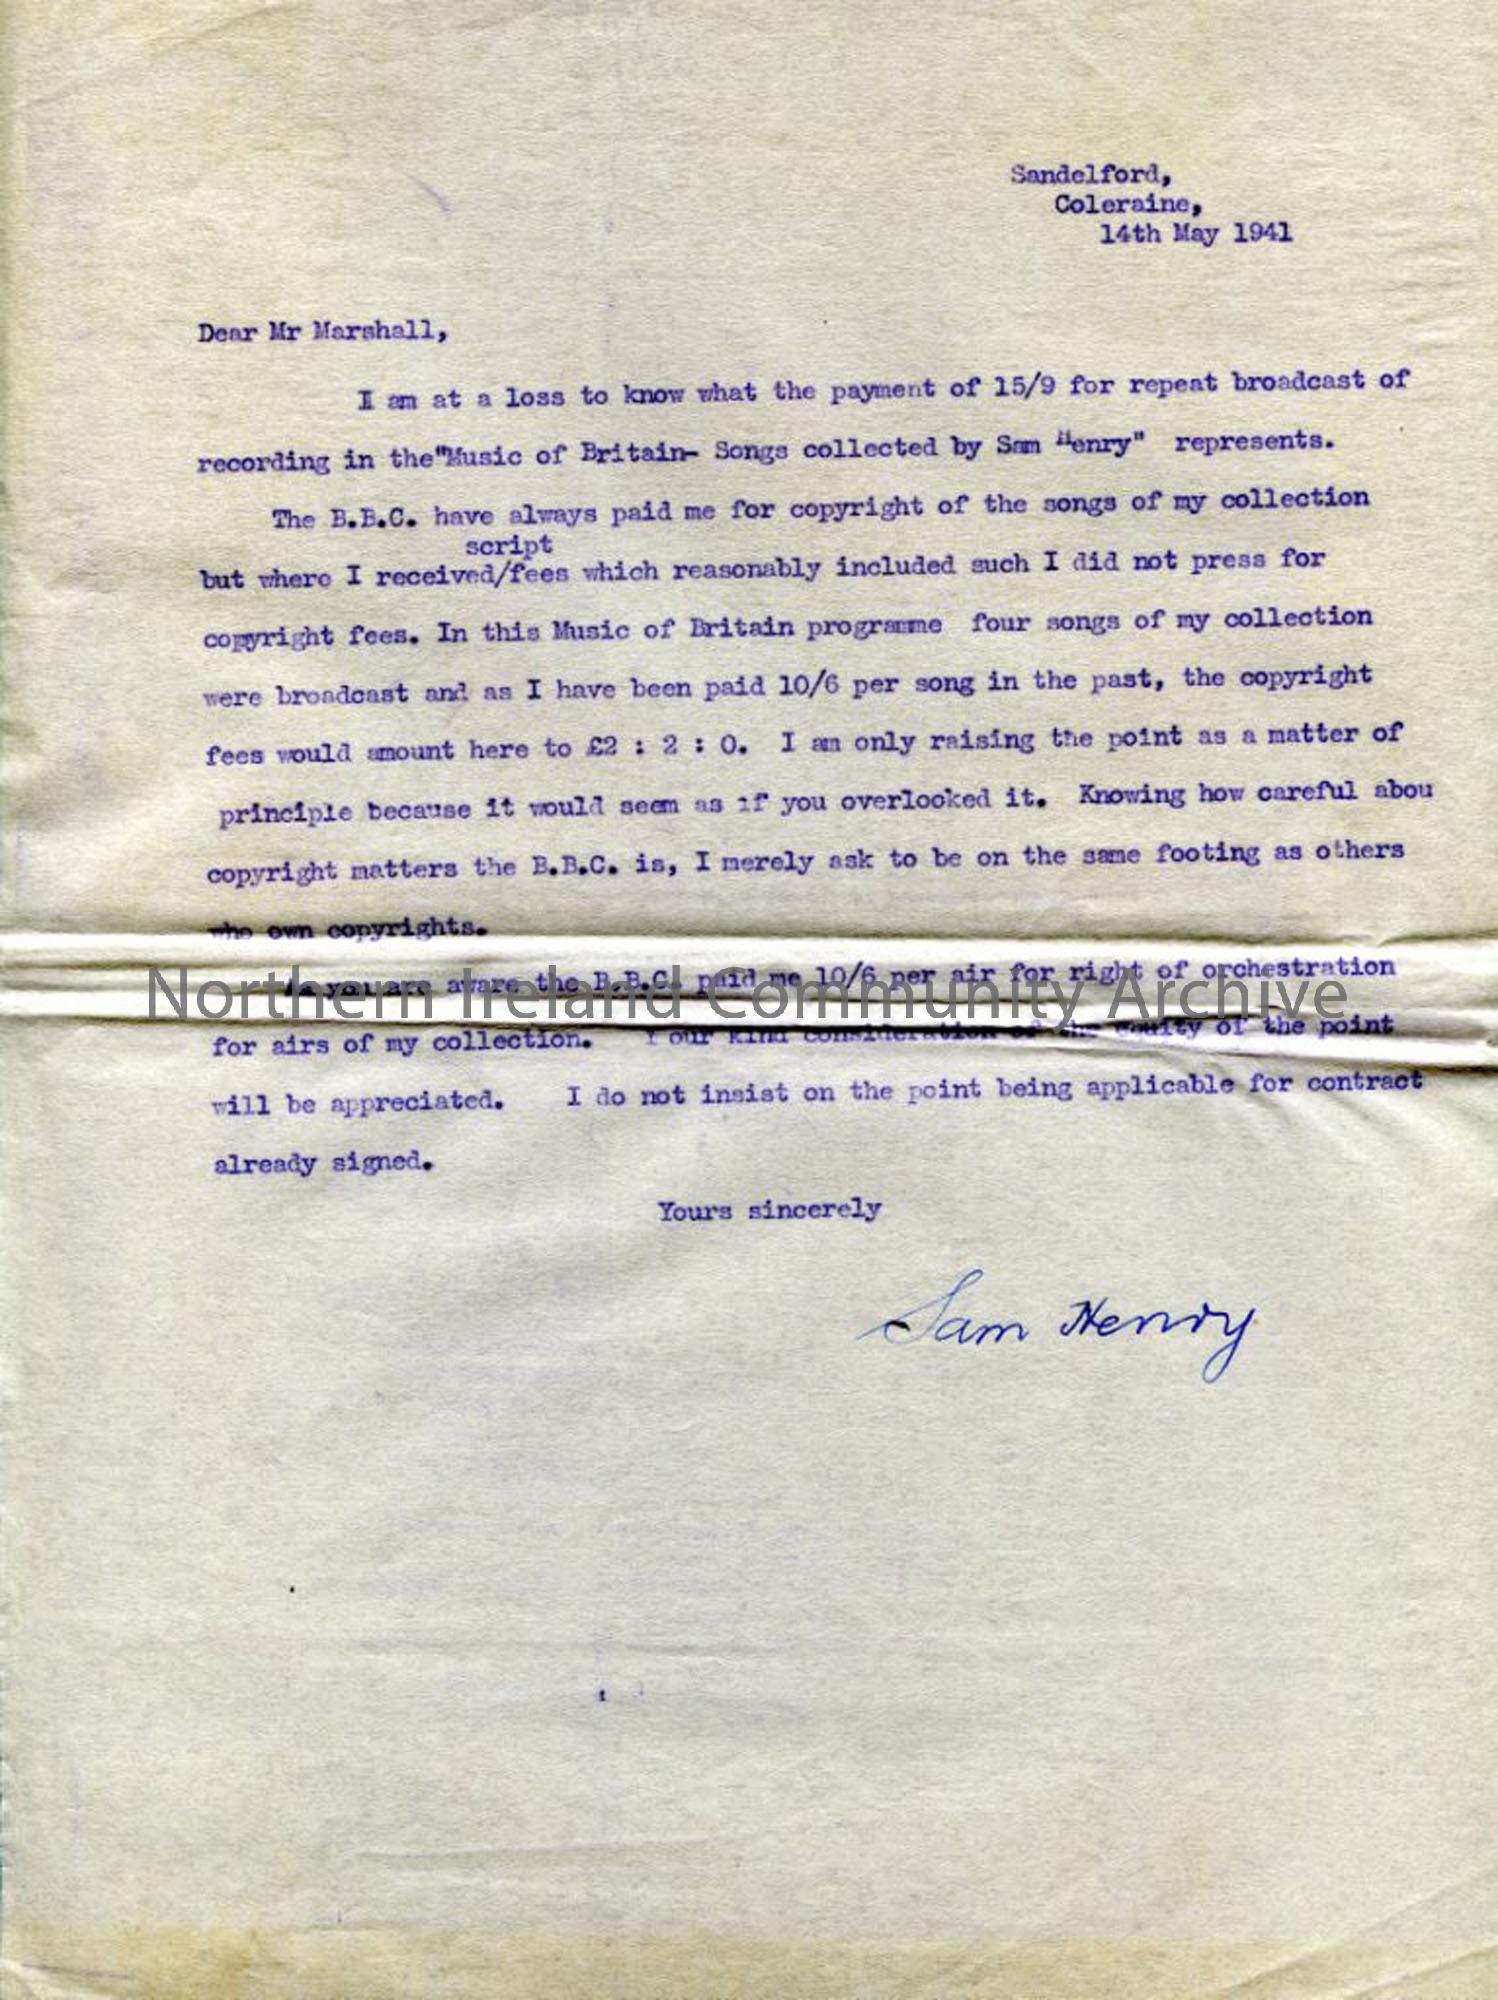 Letter to Mr Marshall of the BBC from Sam Henry, dated 14.5.1941